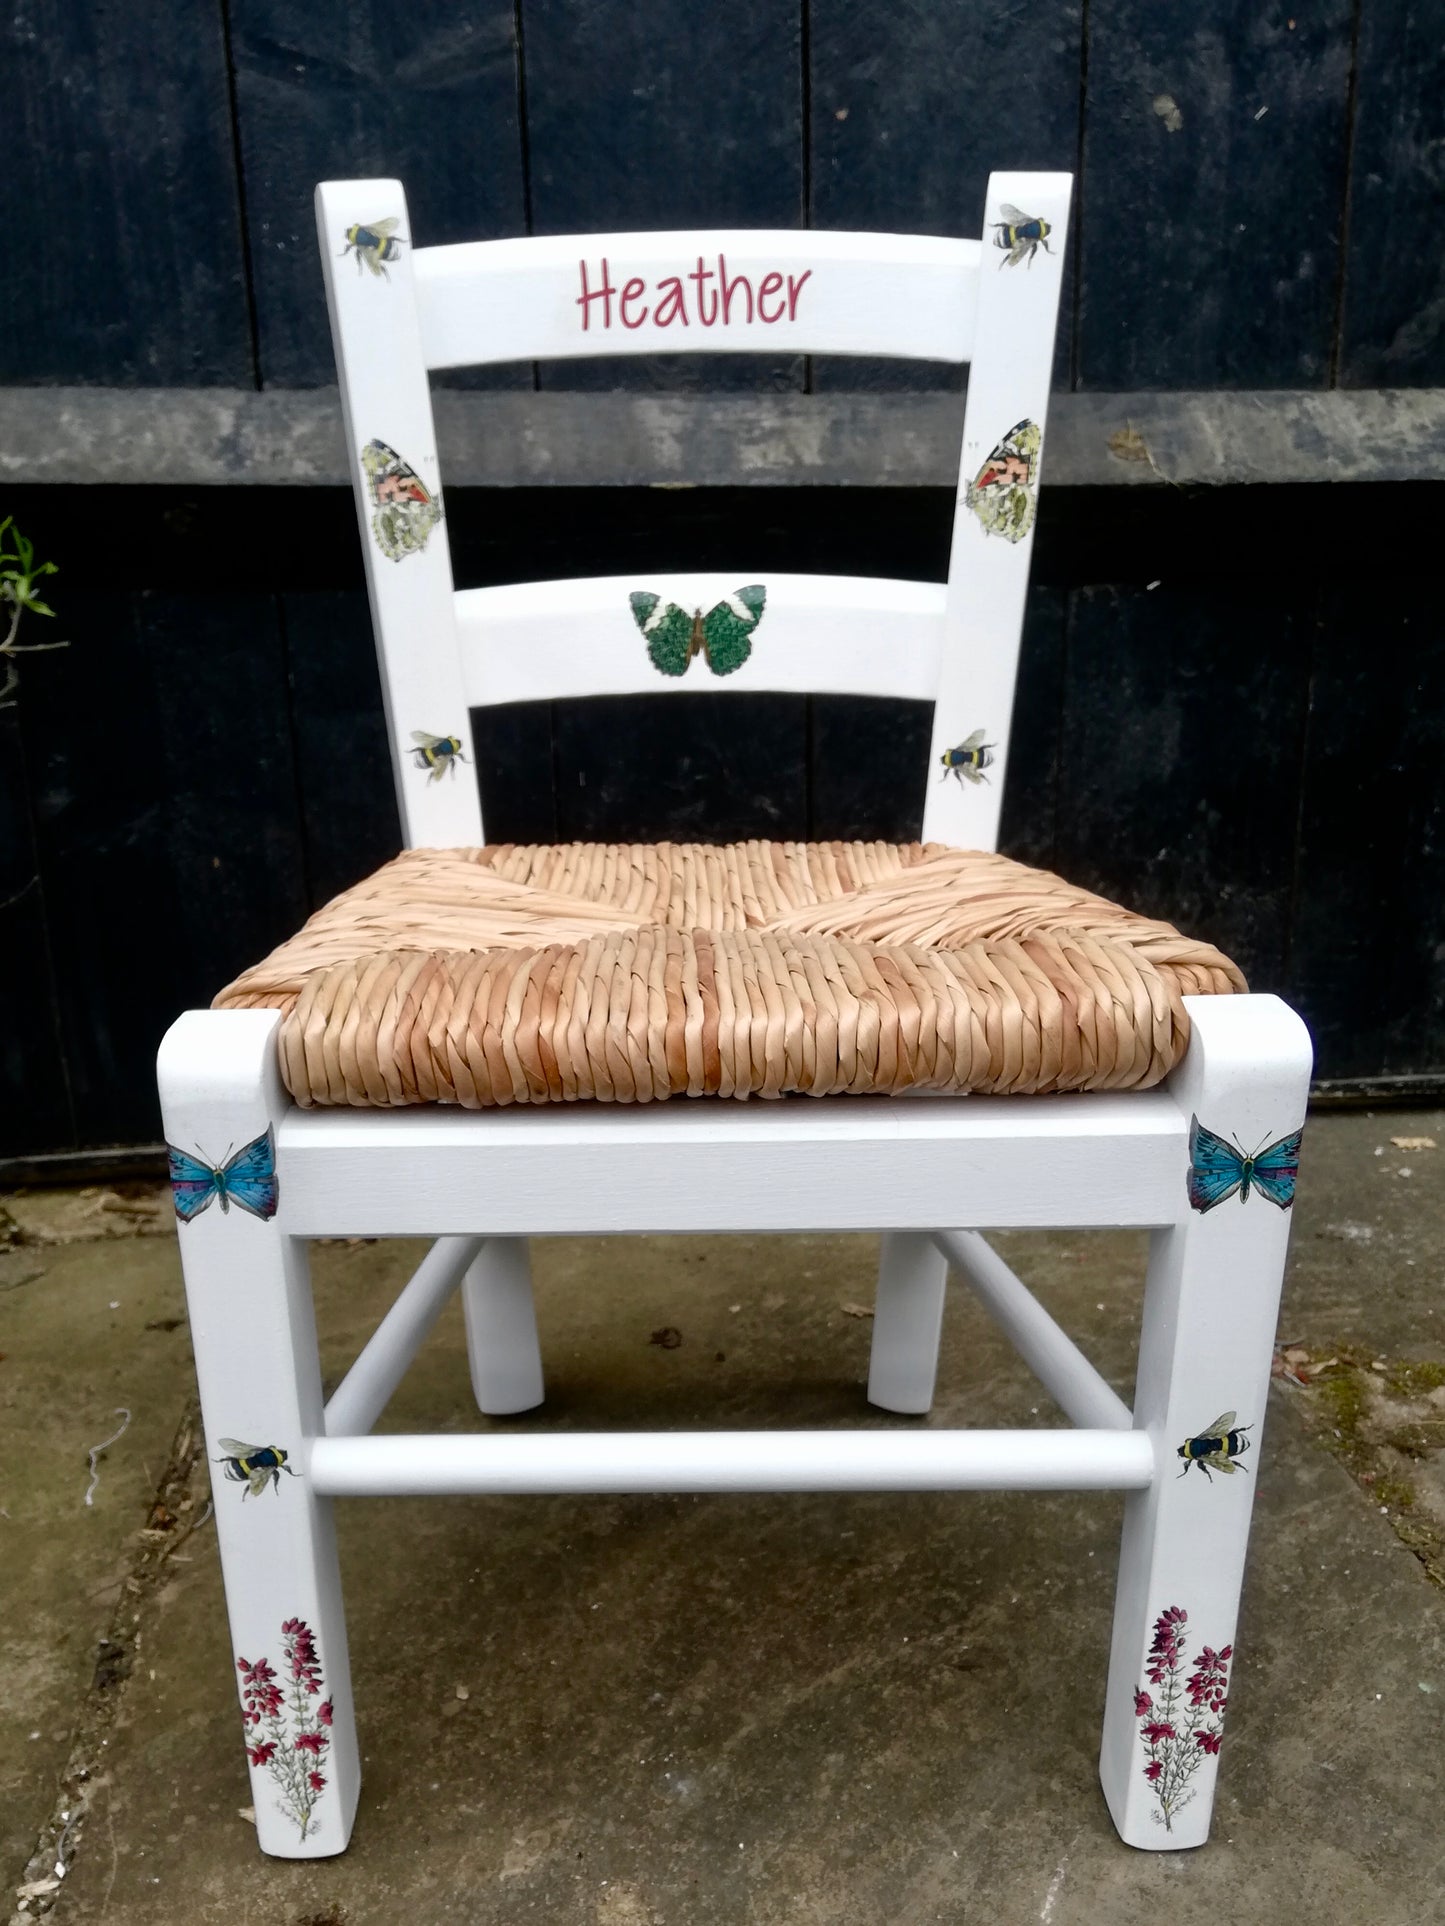 Rush seat personalised children's chair - Heather and butterflies theme - made to order